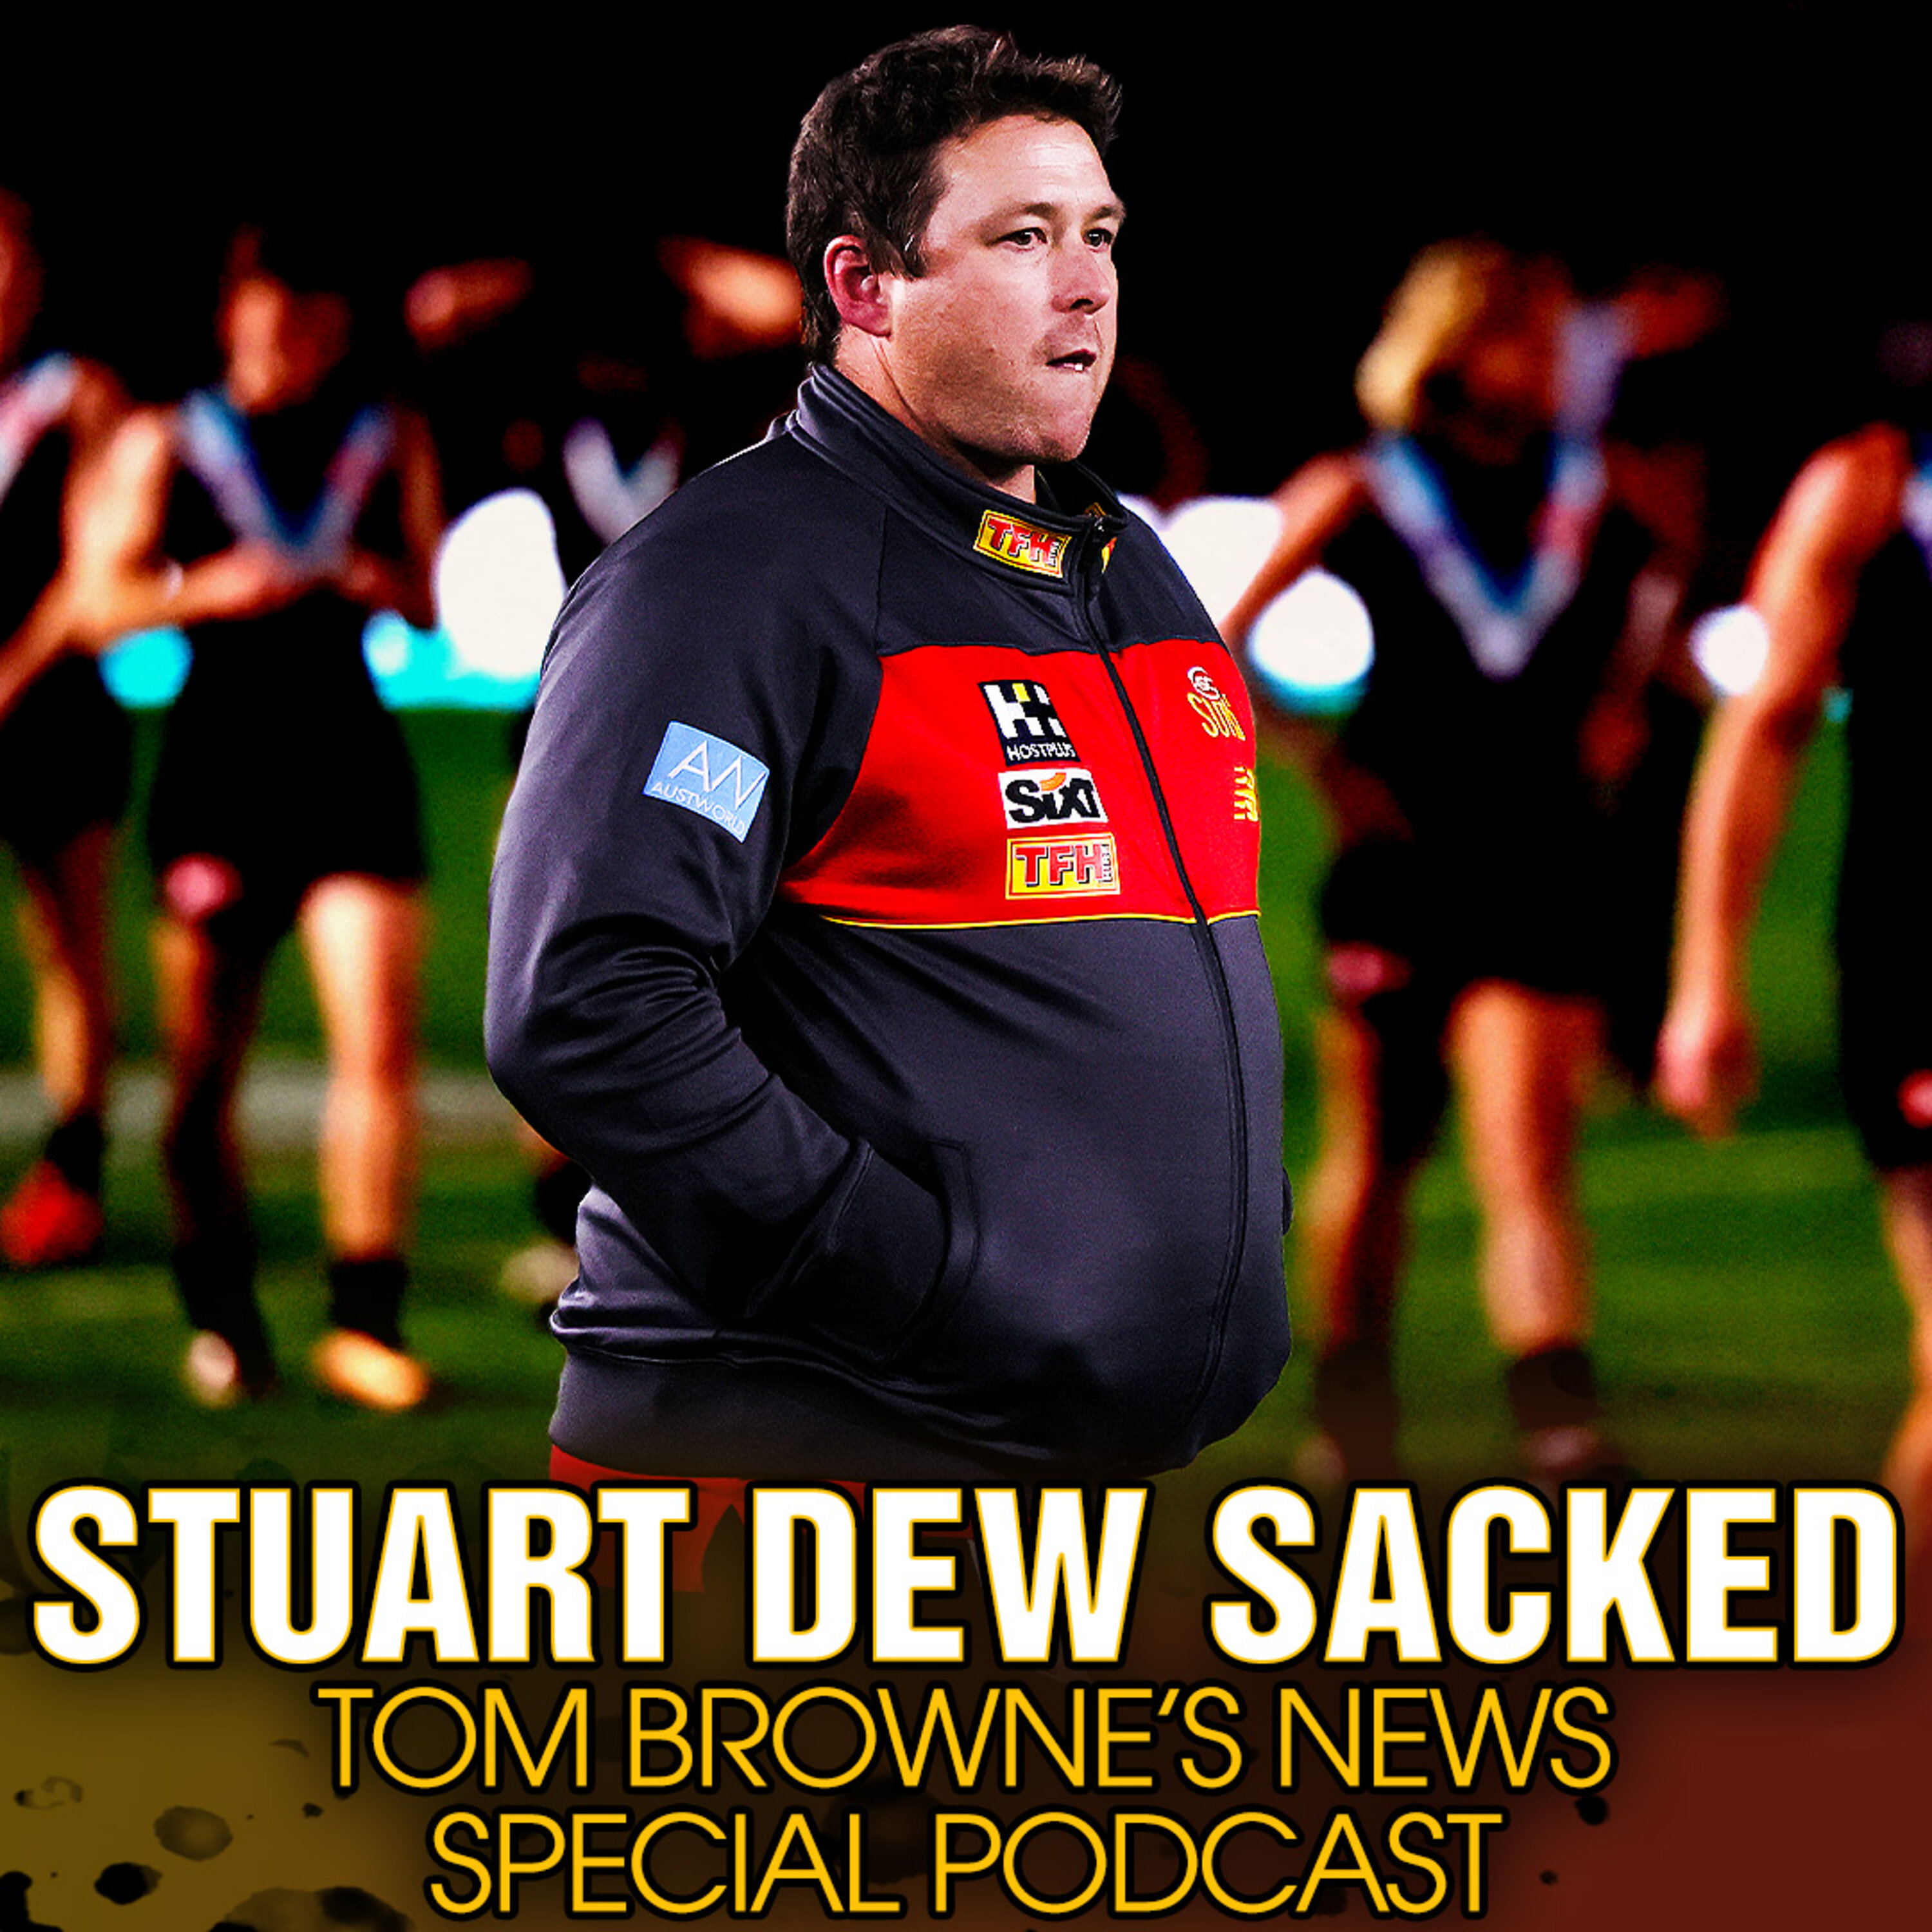 Tom Browne explains Gold Coast's decision to sack Stuart Dew, where the Suns go next, and if Damien Hardwick is favourite to take over